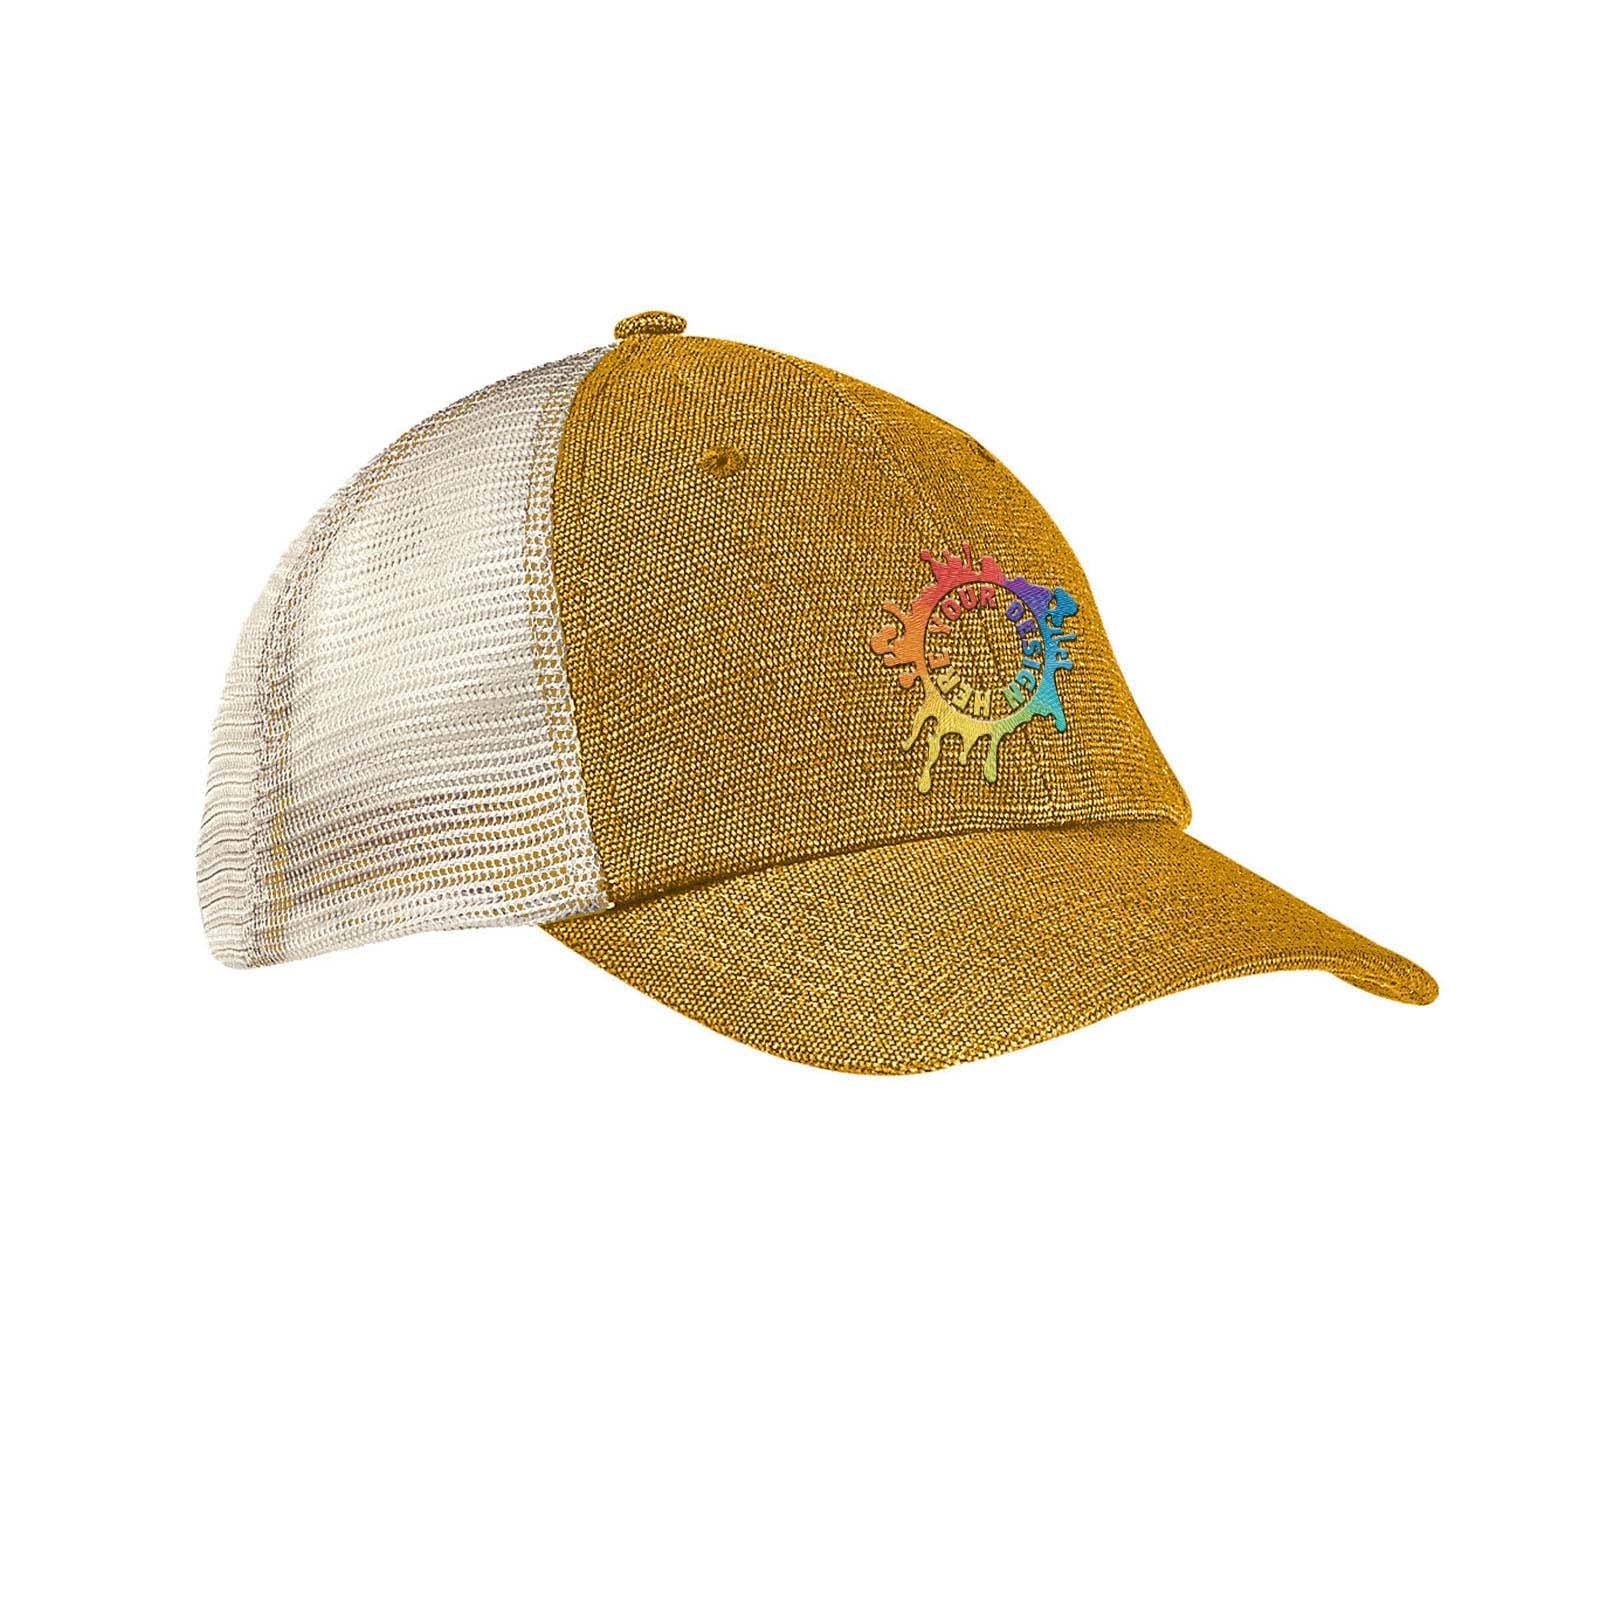 Embroidered econscious Washed Hemp Blend Trucker Hat - Mato & Hash